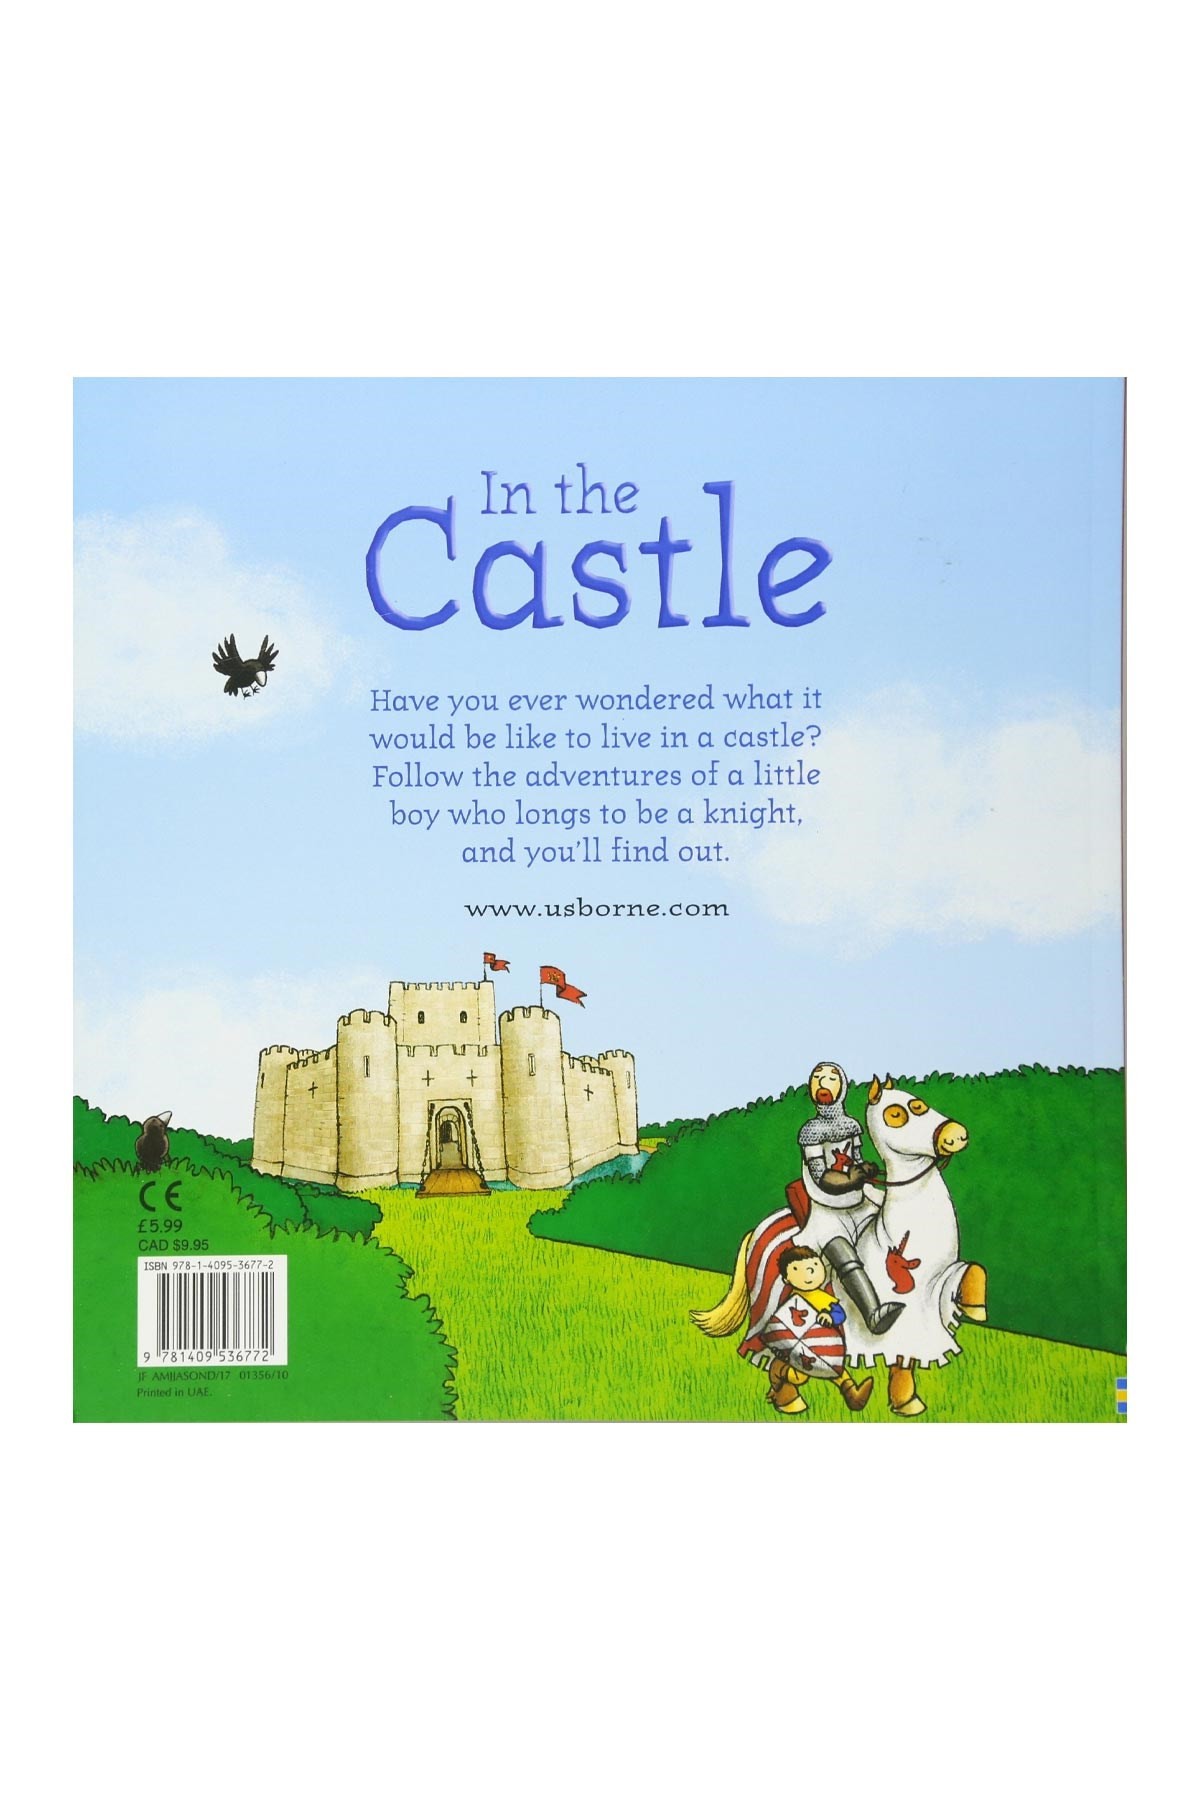 The Usborne In the Castle